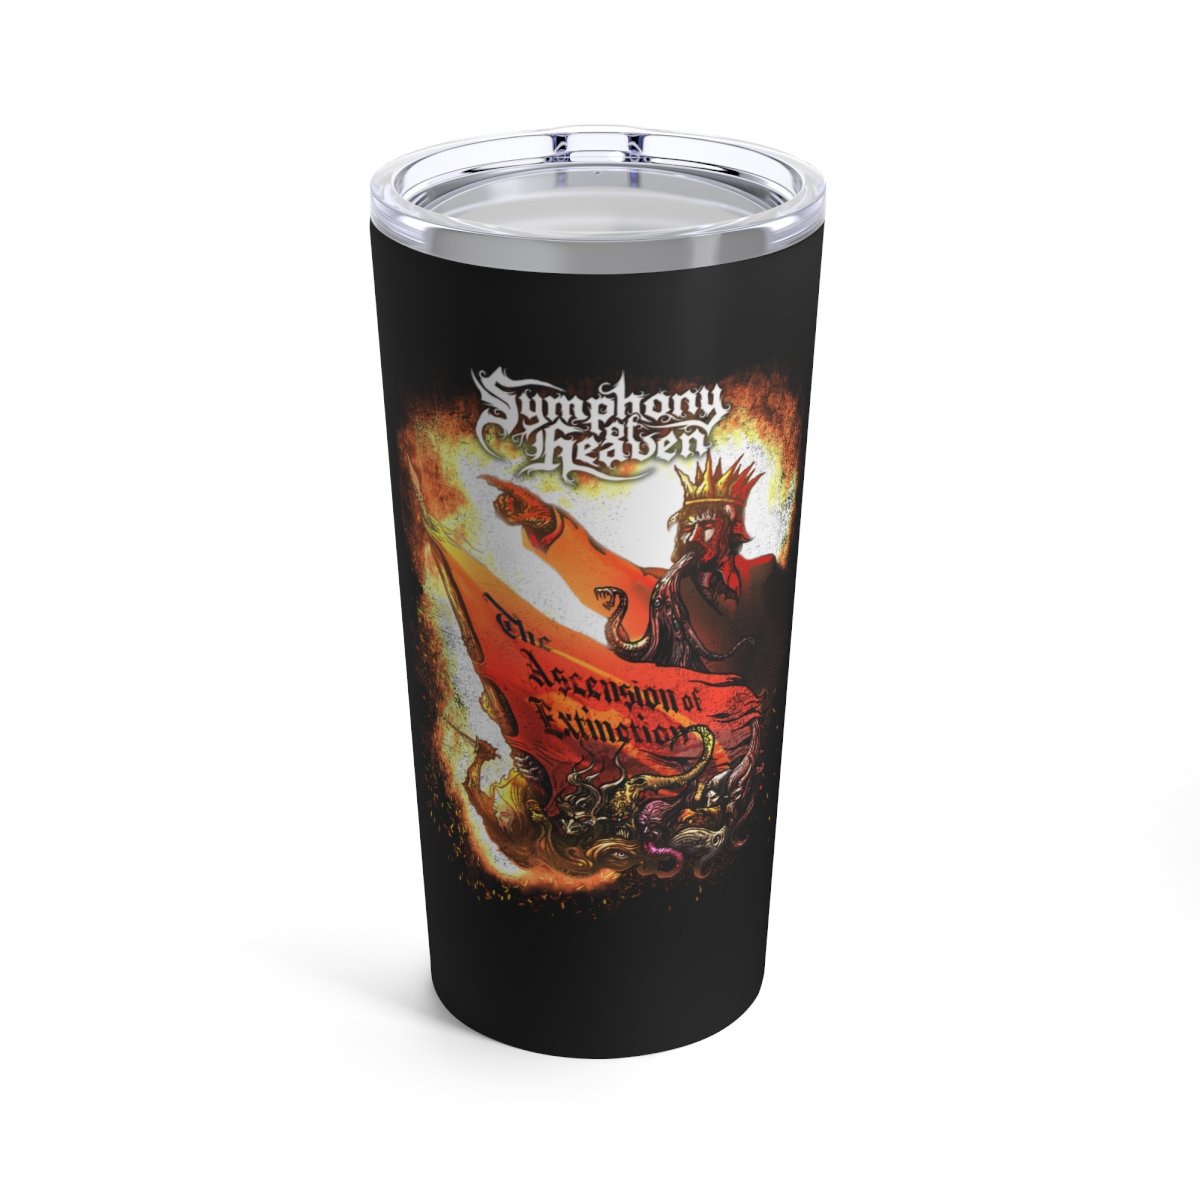 Symphony of Heaven – The Ascension of Extinction 20oz Stainless Steel Tumbler